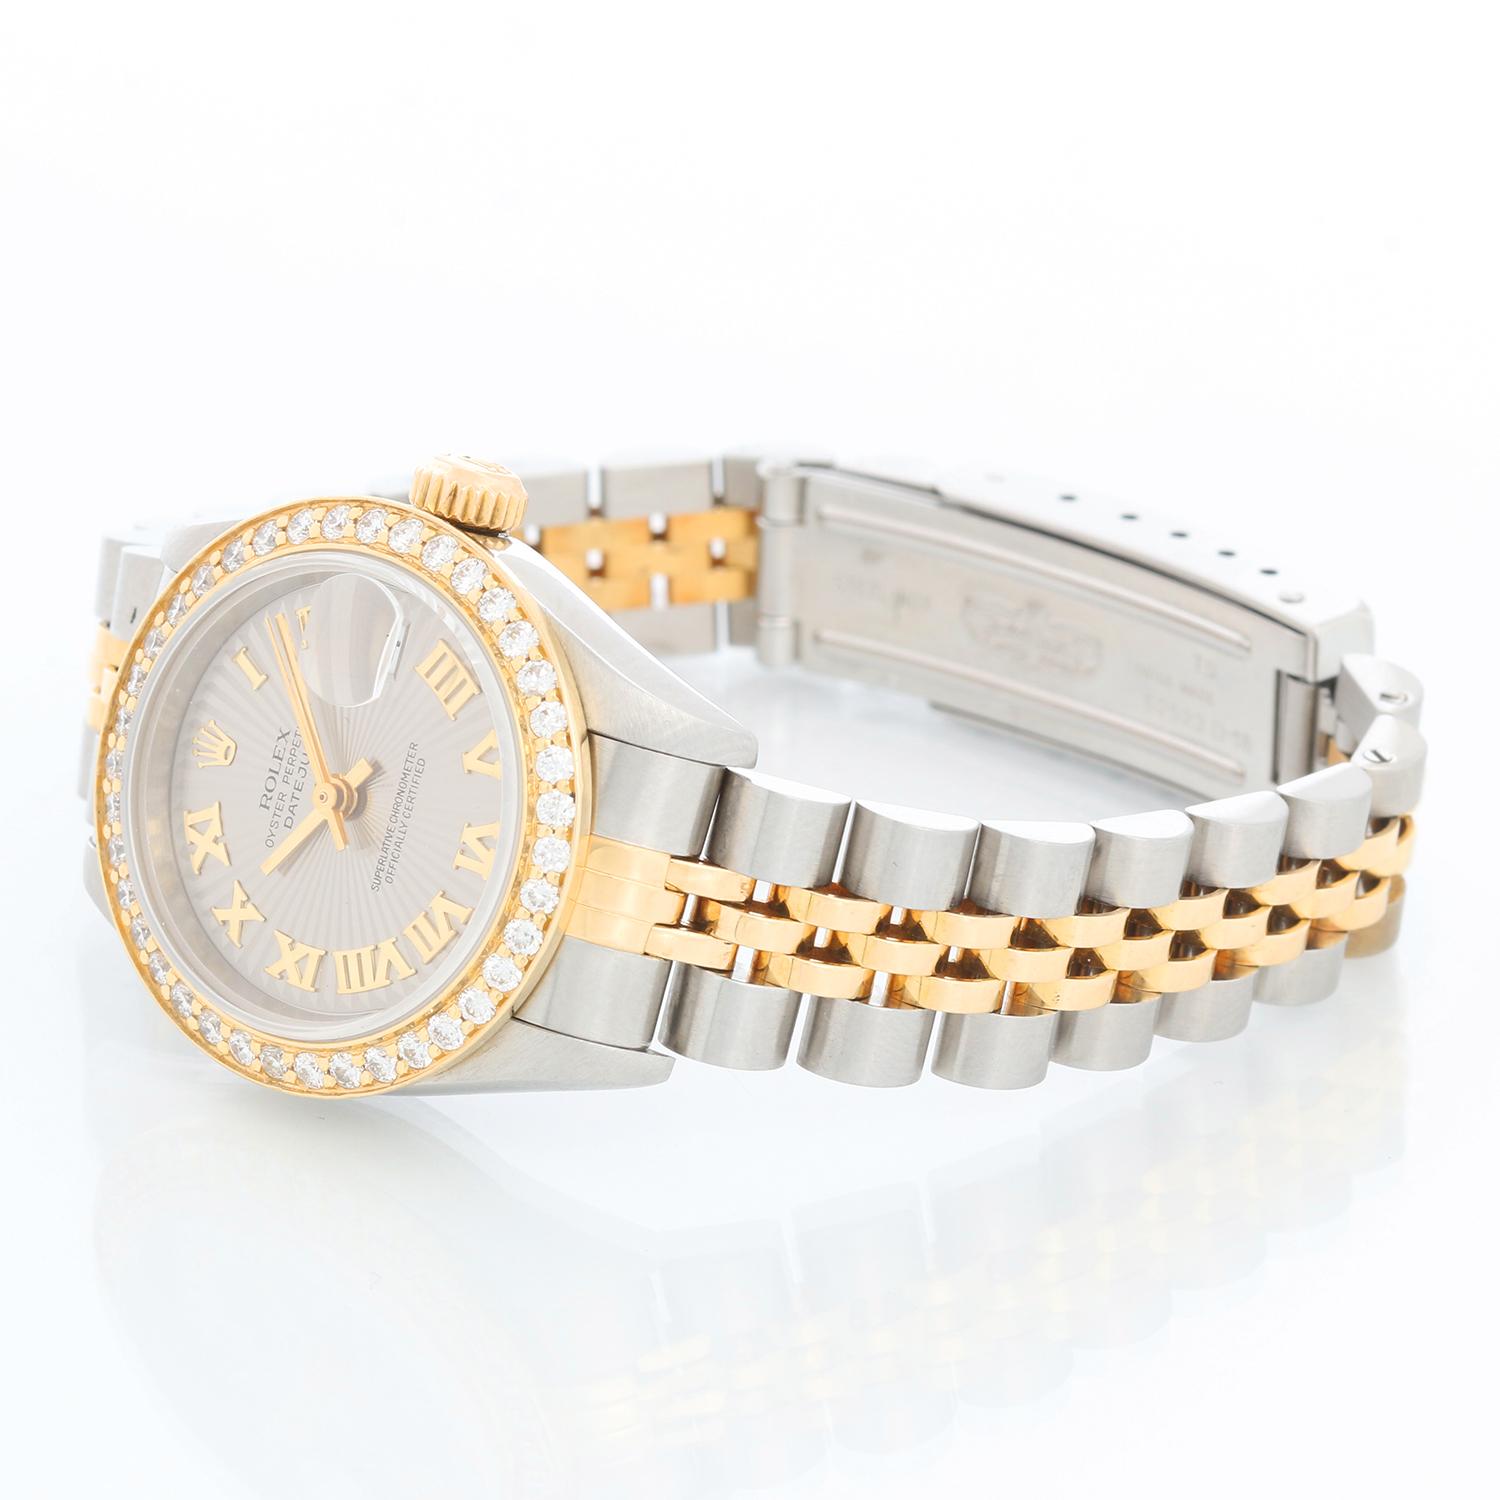 Rolex  Datejust 2-tone Steel & Gold Ladies Watch 79173 - Automatic winding, 29 jewels, Quickset date, sapphire crystal. Stainless steel case with custom diamond bezel  (26mm diameter). Gray Slate dial with Roman numerals . Stainless steel and 18k